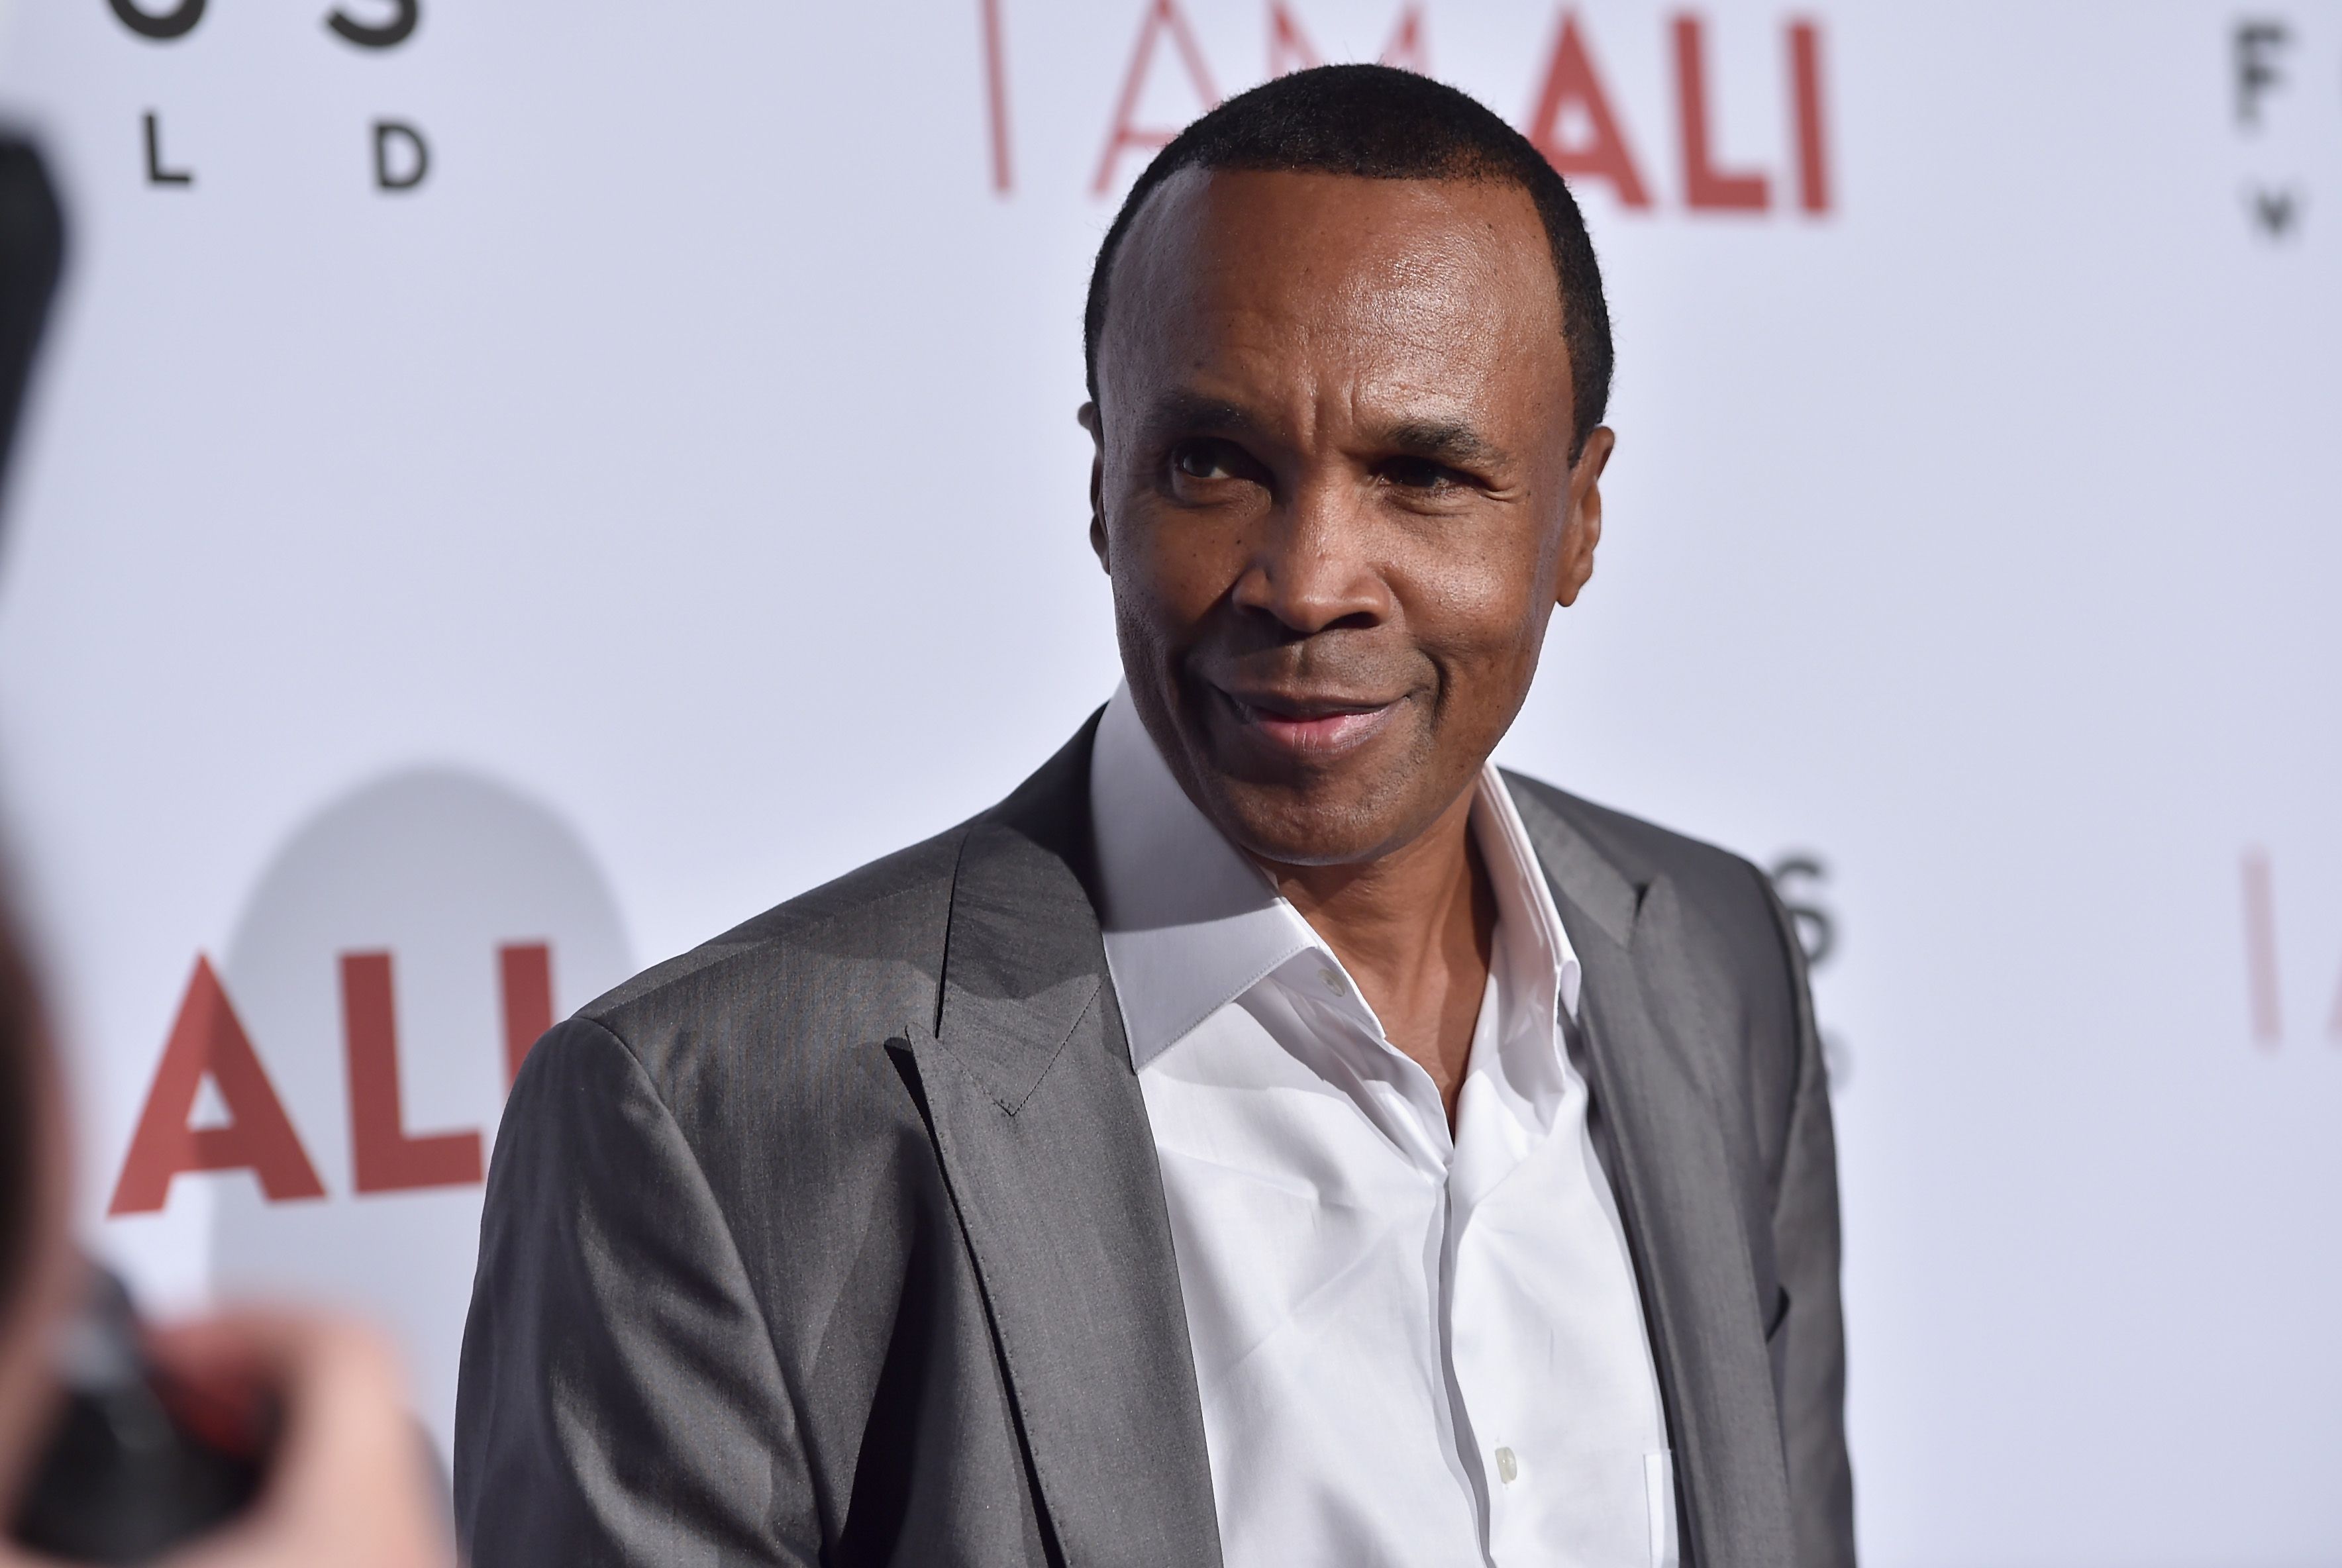 Sugar Ray Leonard attends the Los Angeles premiere of Focus World's "I Am Ali" at ArcLight Cinemas on October 8, 2014. | Photo: Getty Images